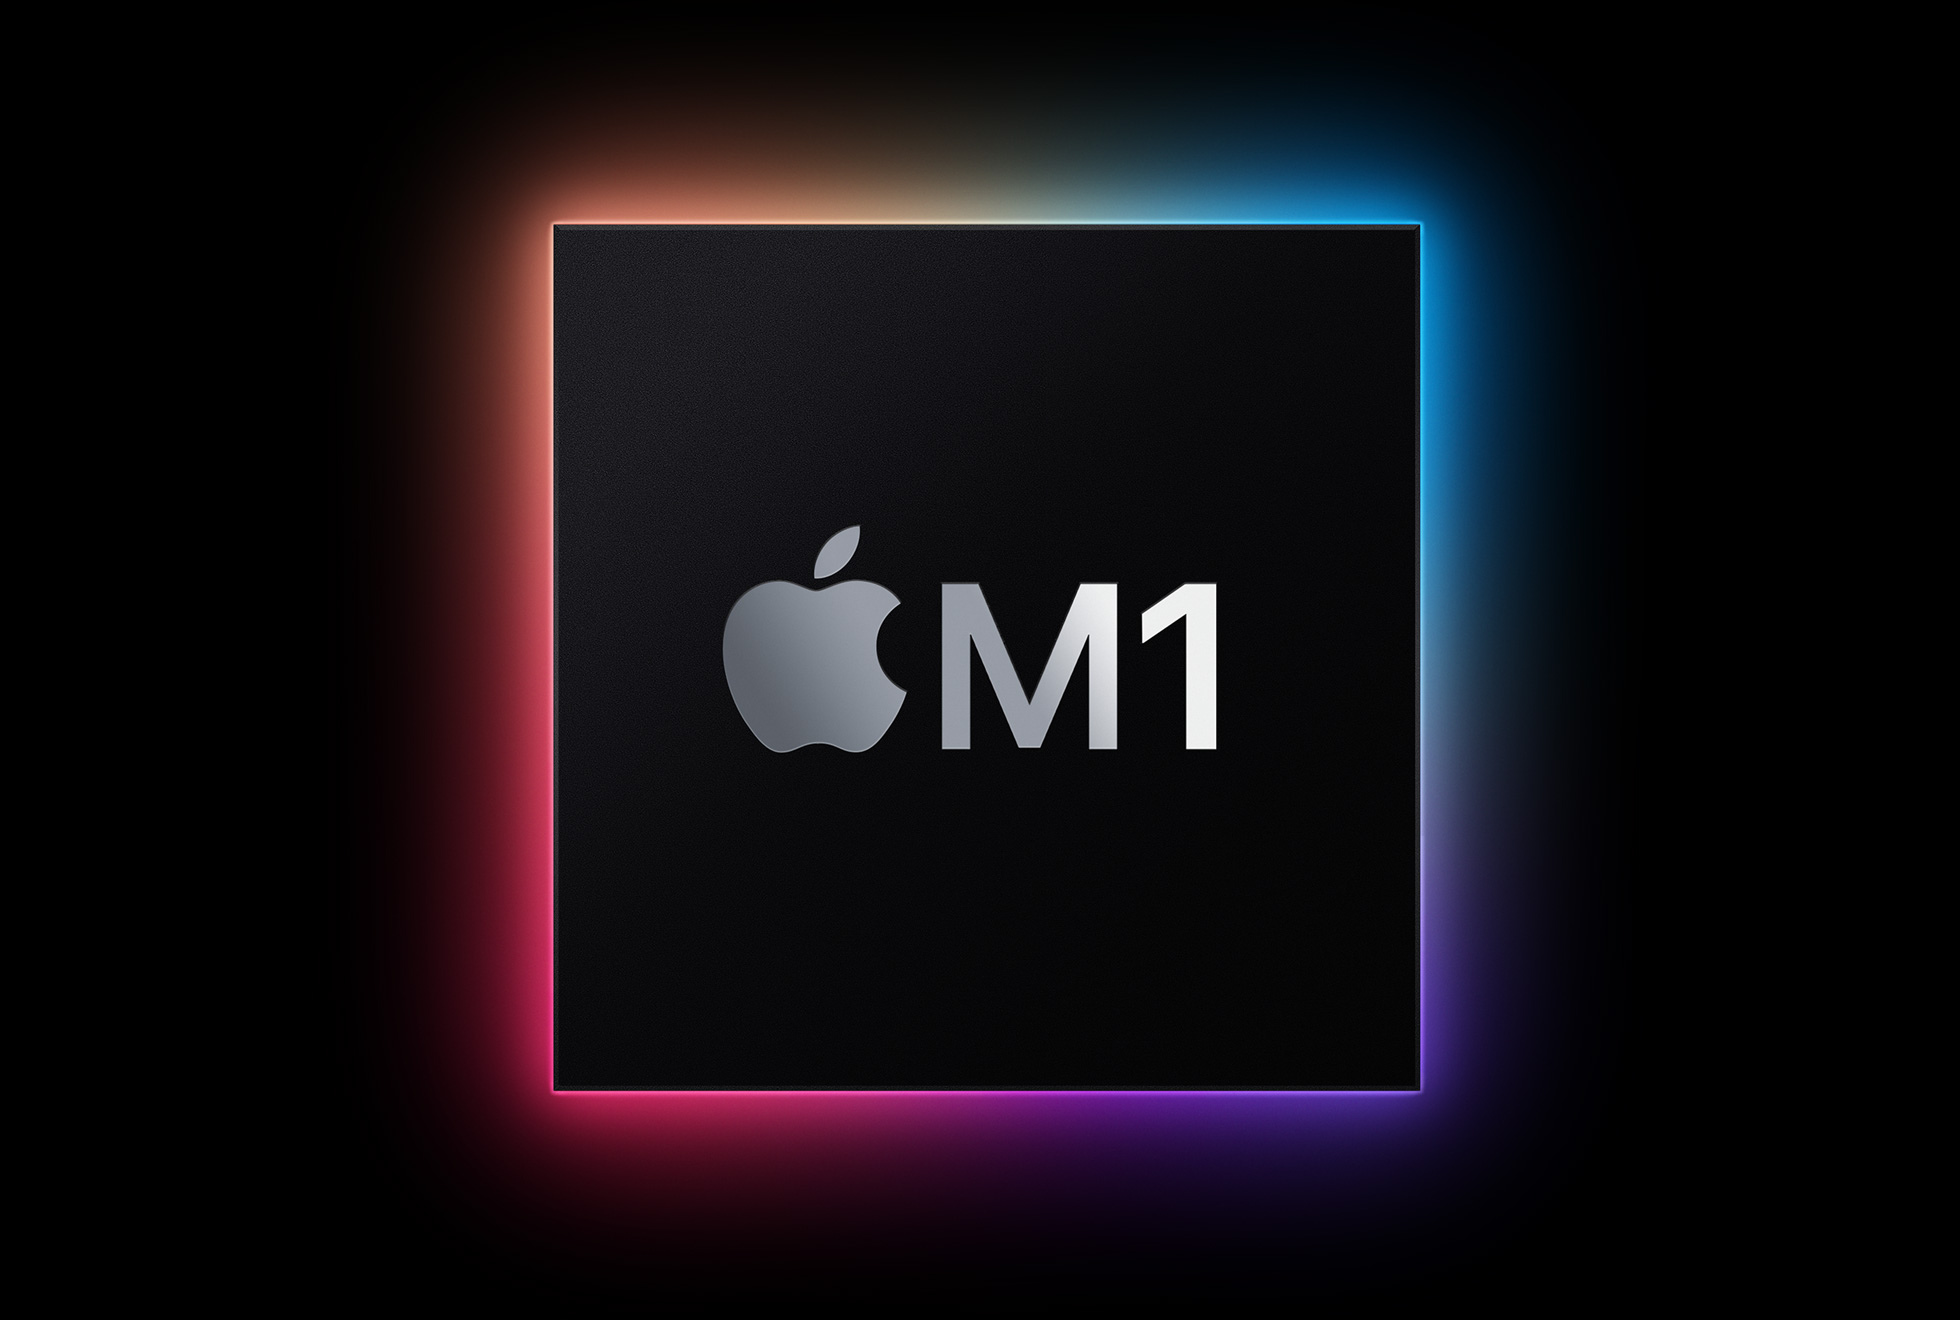 M1 (Source, Apple Newsroom, for personal and editorial use)